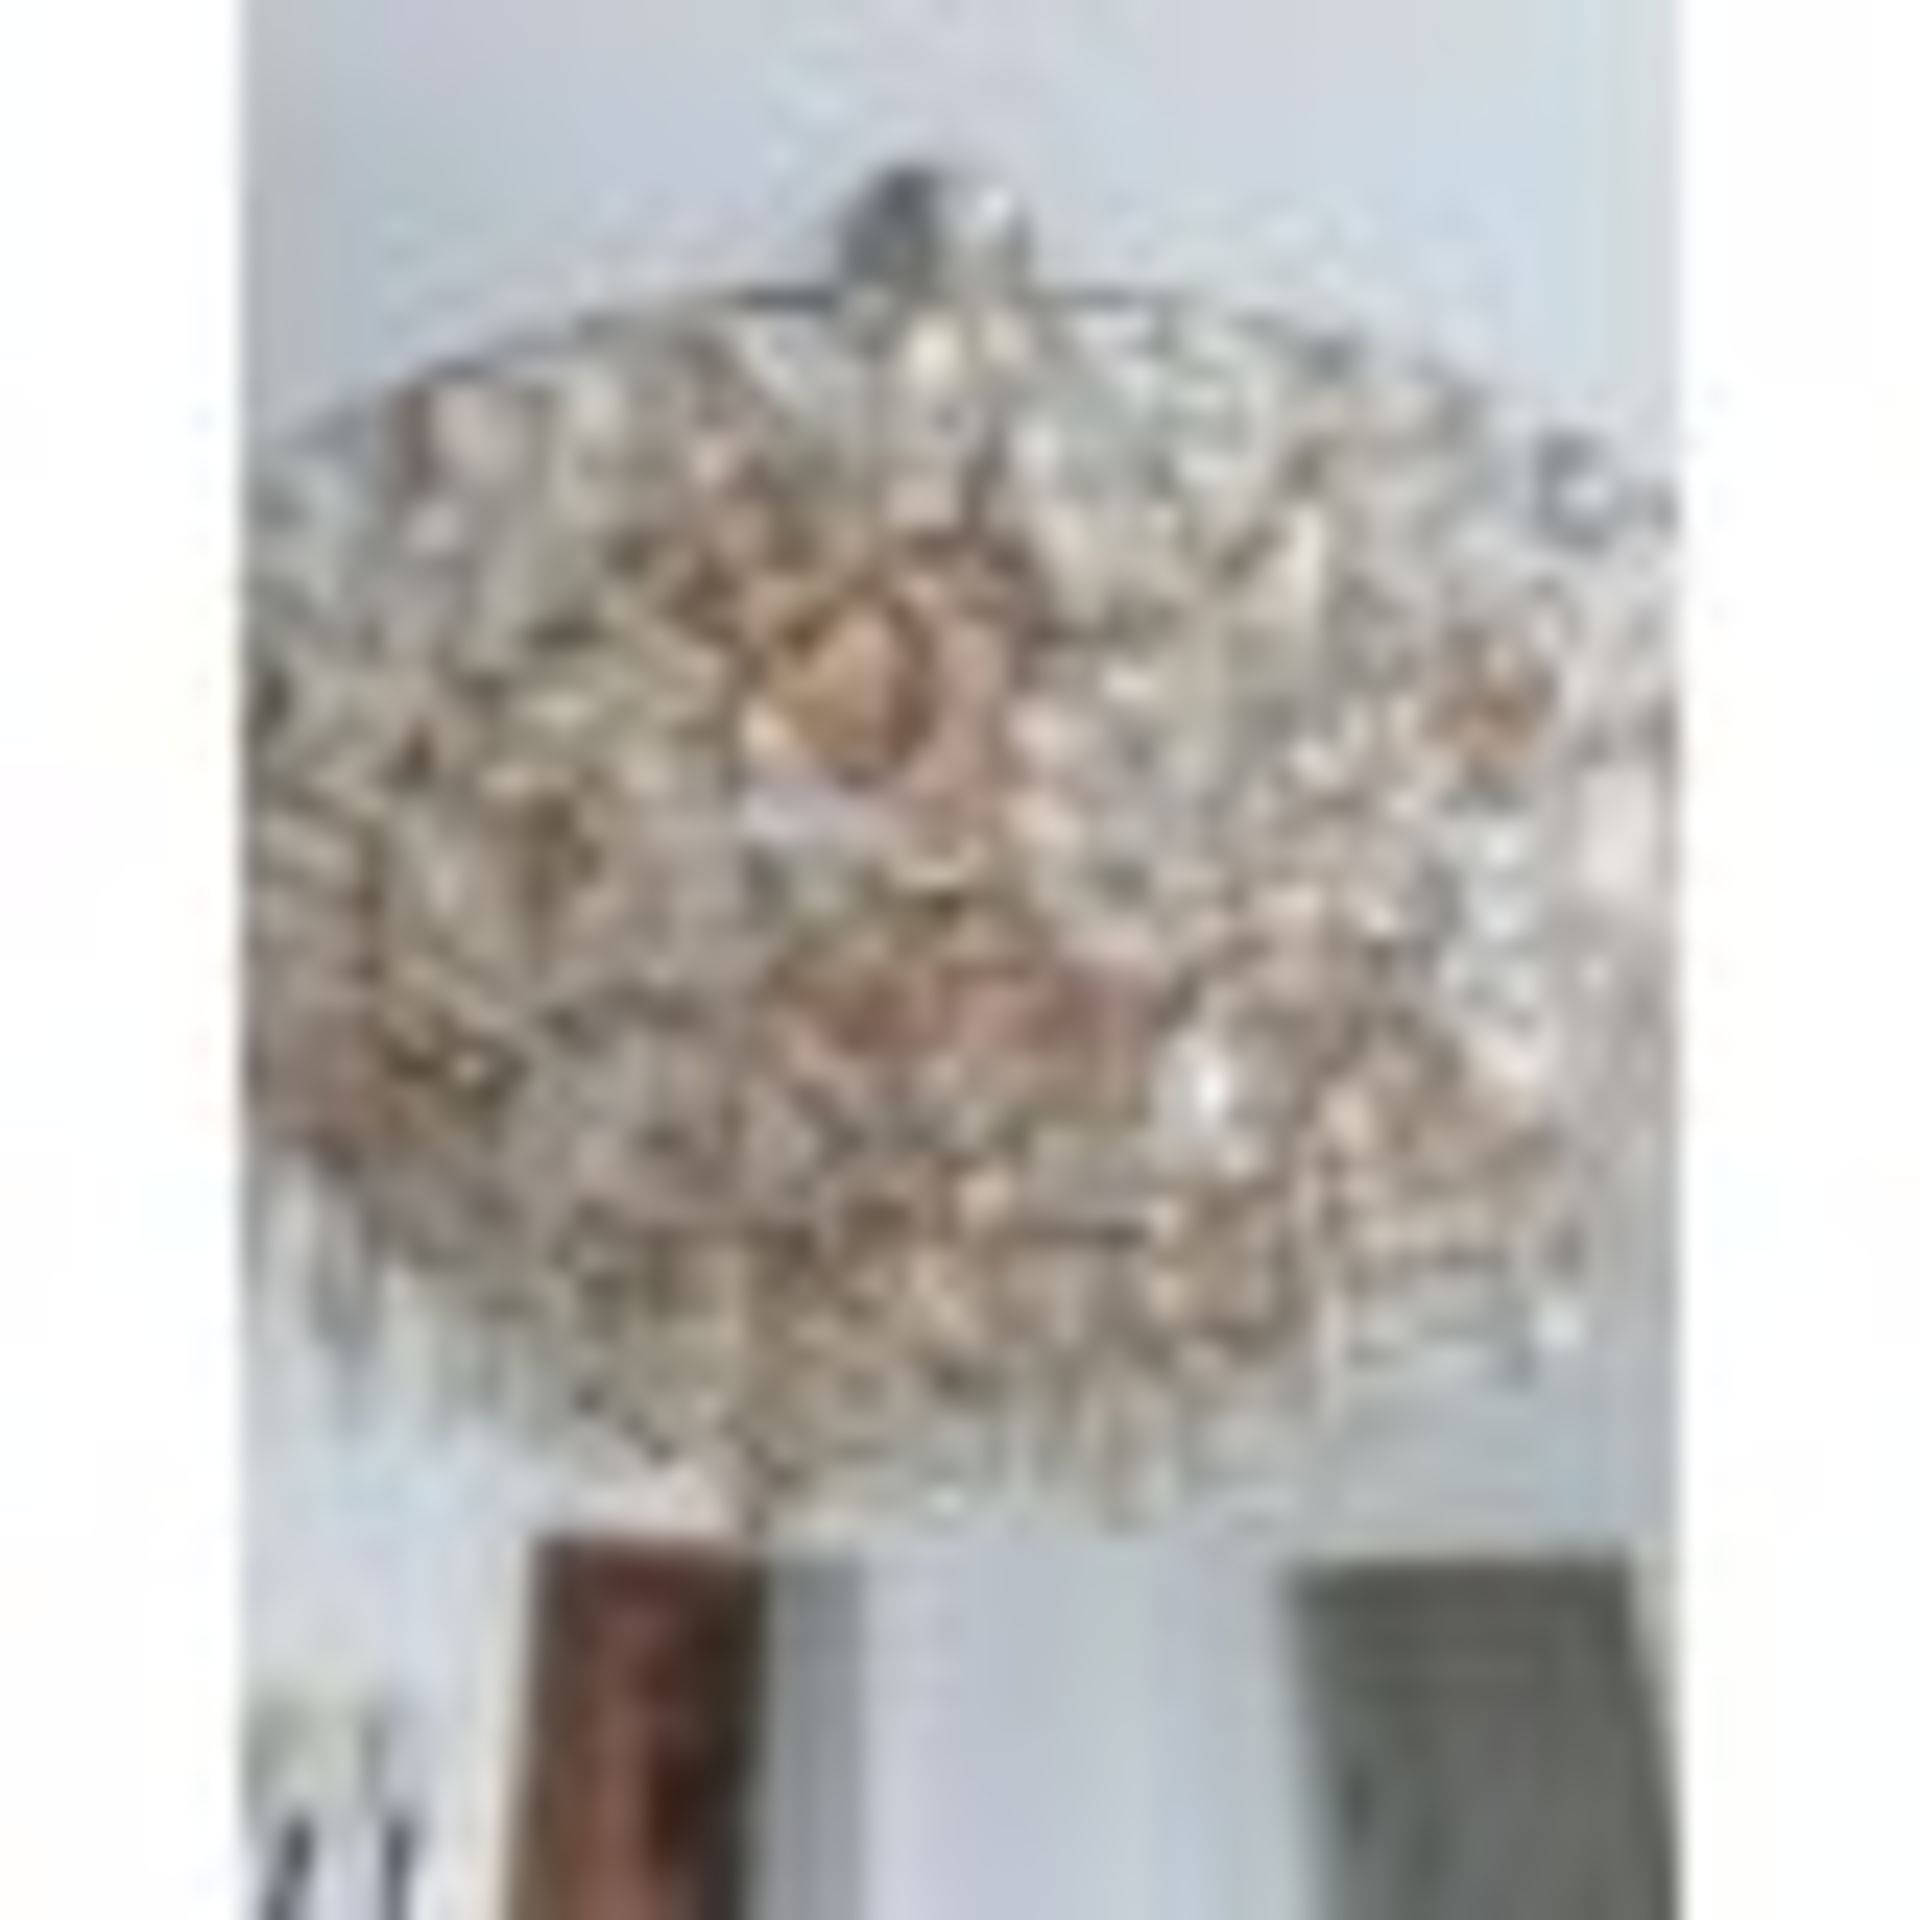 Lolli E Memmoli Ugolino Chandelier Crystals Woven Together Like Fabric, Hung From A Two- - Image 2 of 2